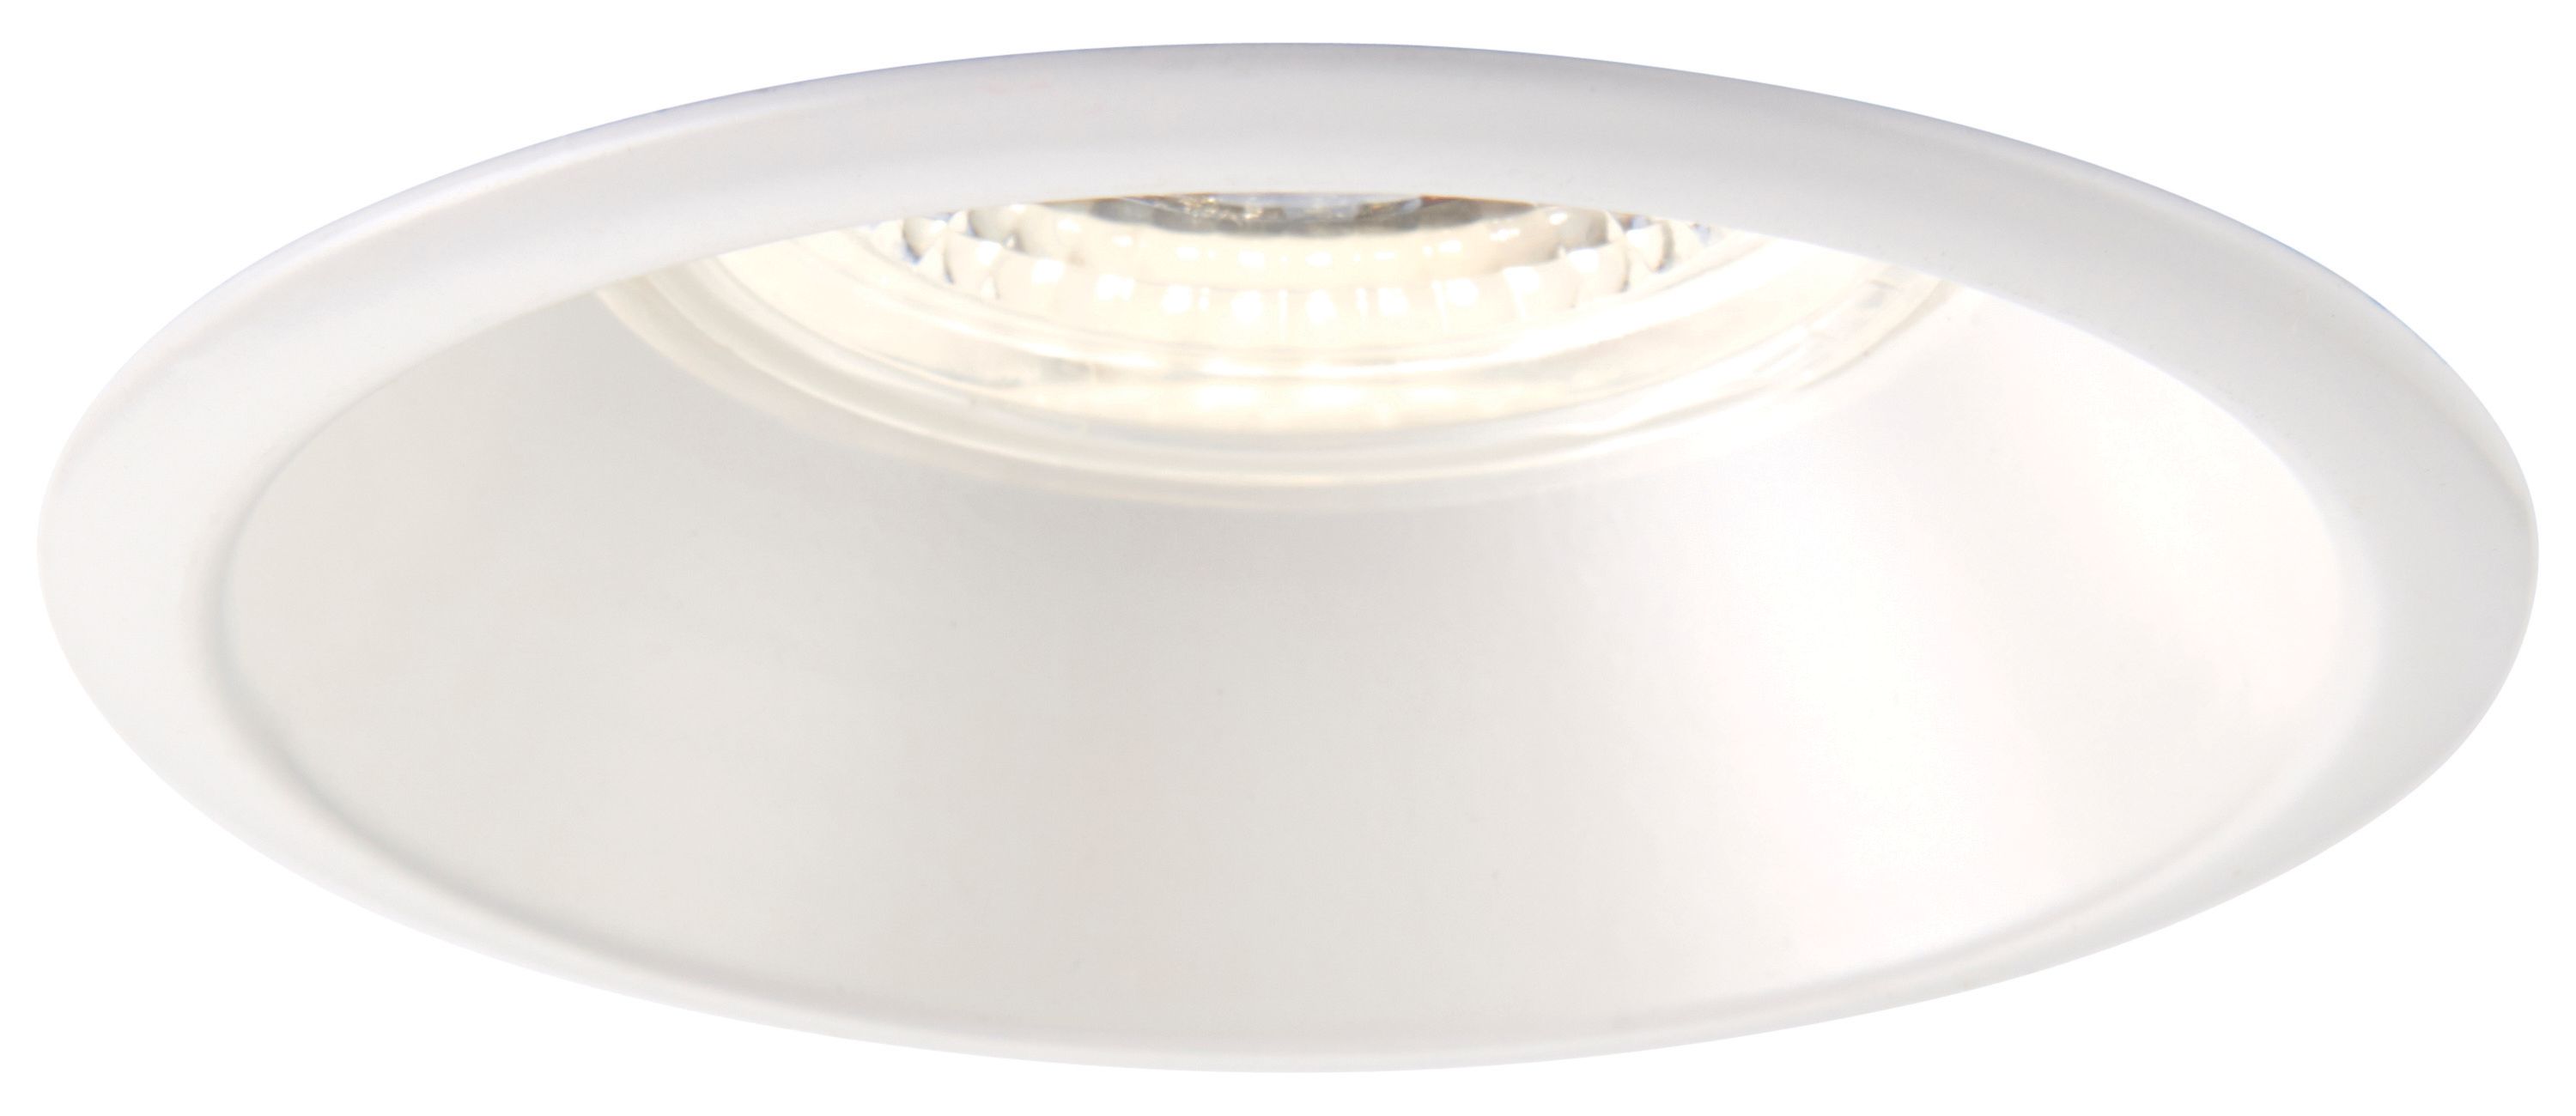 Saxby Integrated LED Fire Rated Anti Glare IP65 Fixed Cool White Downlight